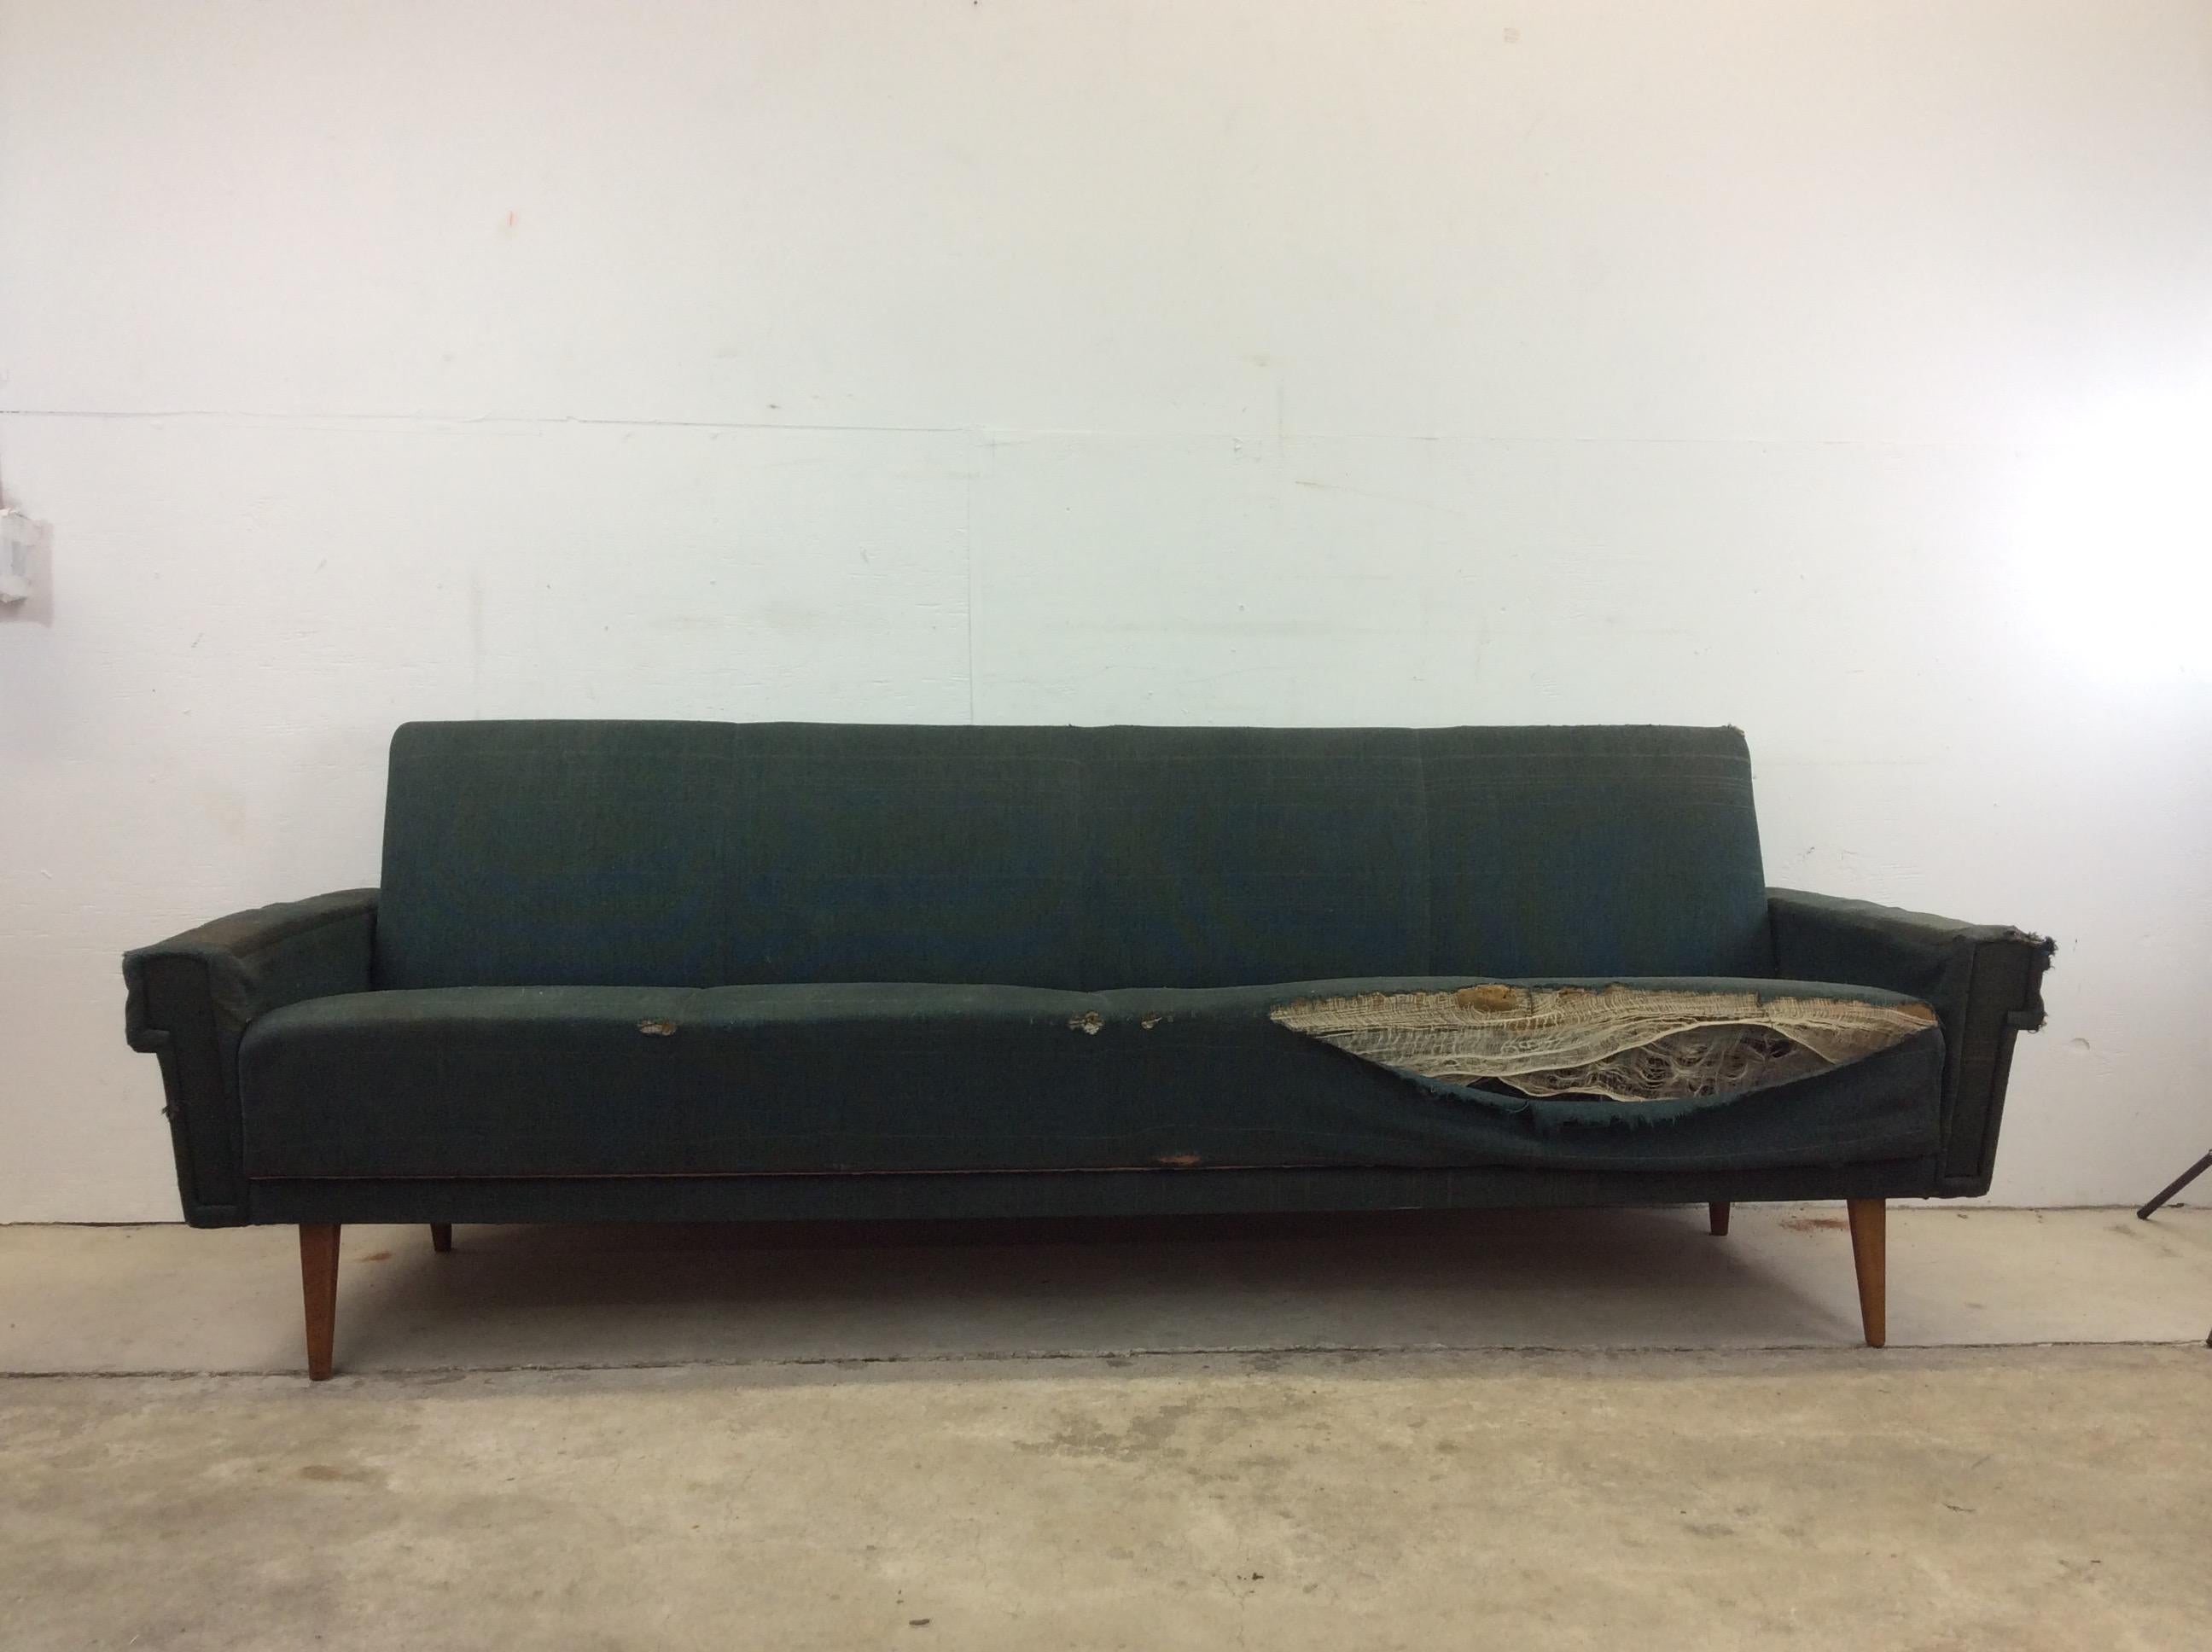 This Mid-Century Modern convertible sofa features hardwood construction, original upholstery which needs to be replaced, metal folding mechanism that converts it into a bed.??Dimension when opened: 88.5w 38.5d 17.5h

Dimensions: 88.5w 27.25d